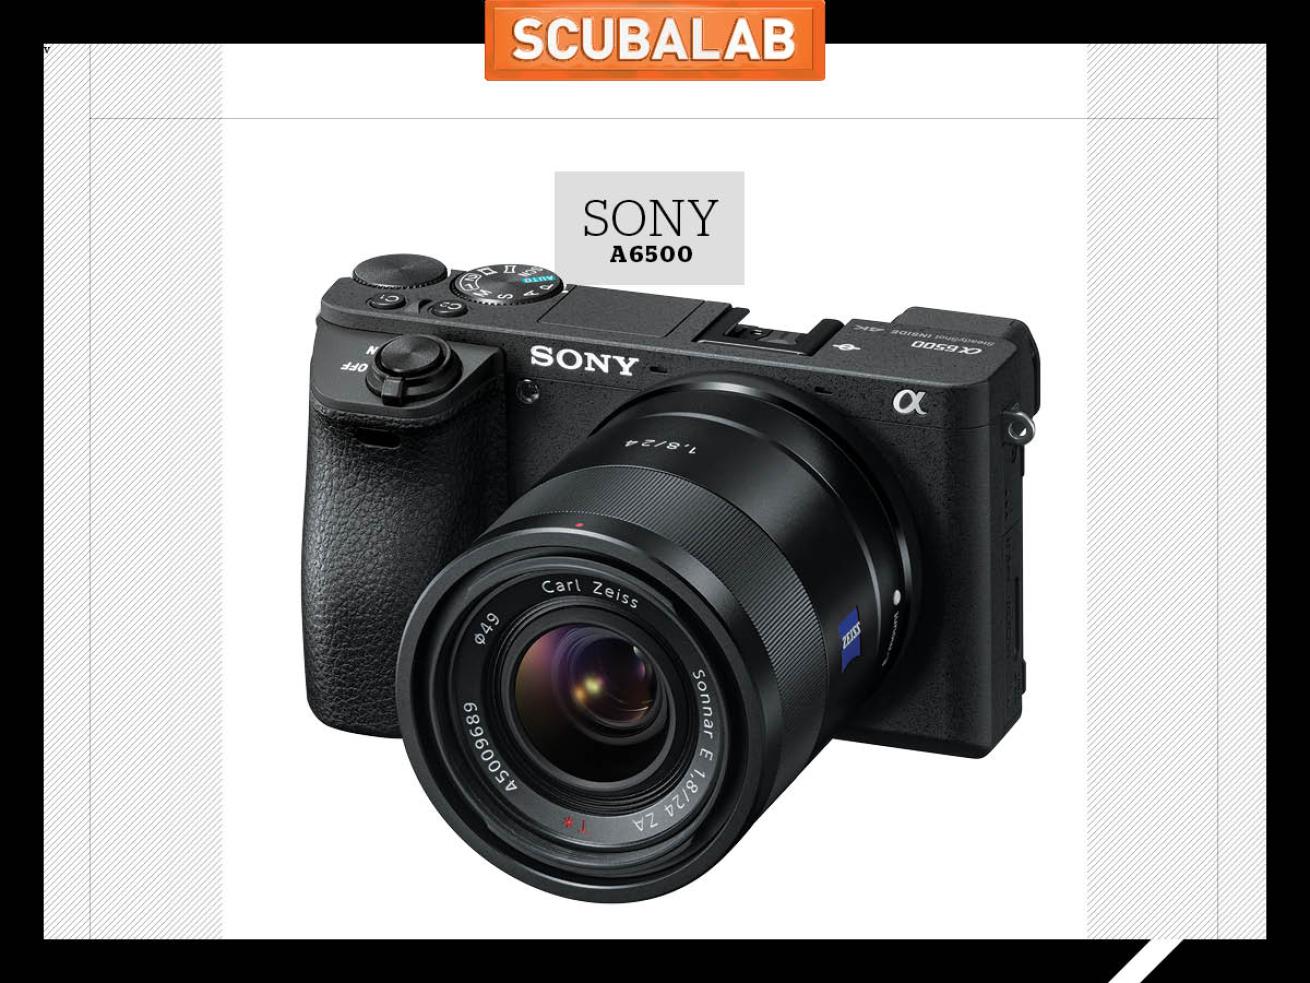 Sony A6500 camera for underwater photography